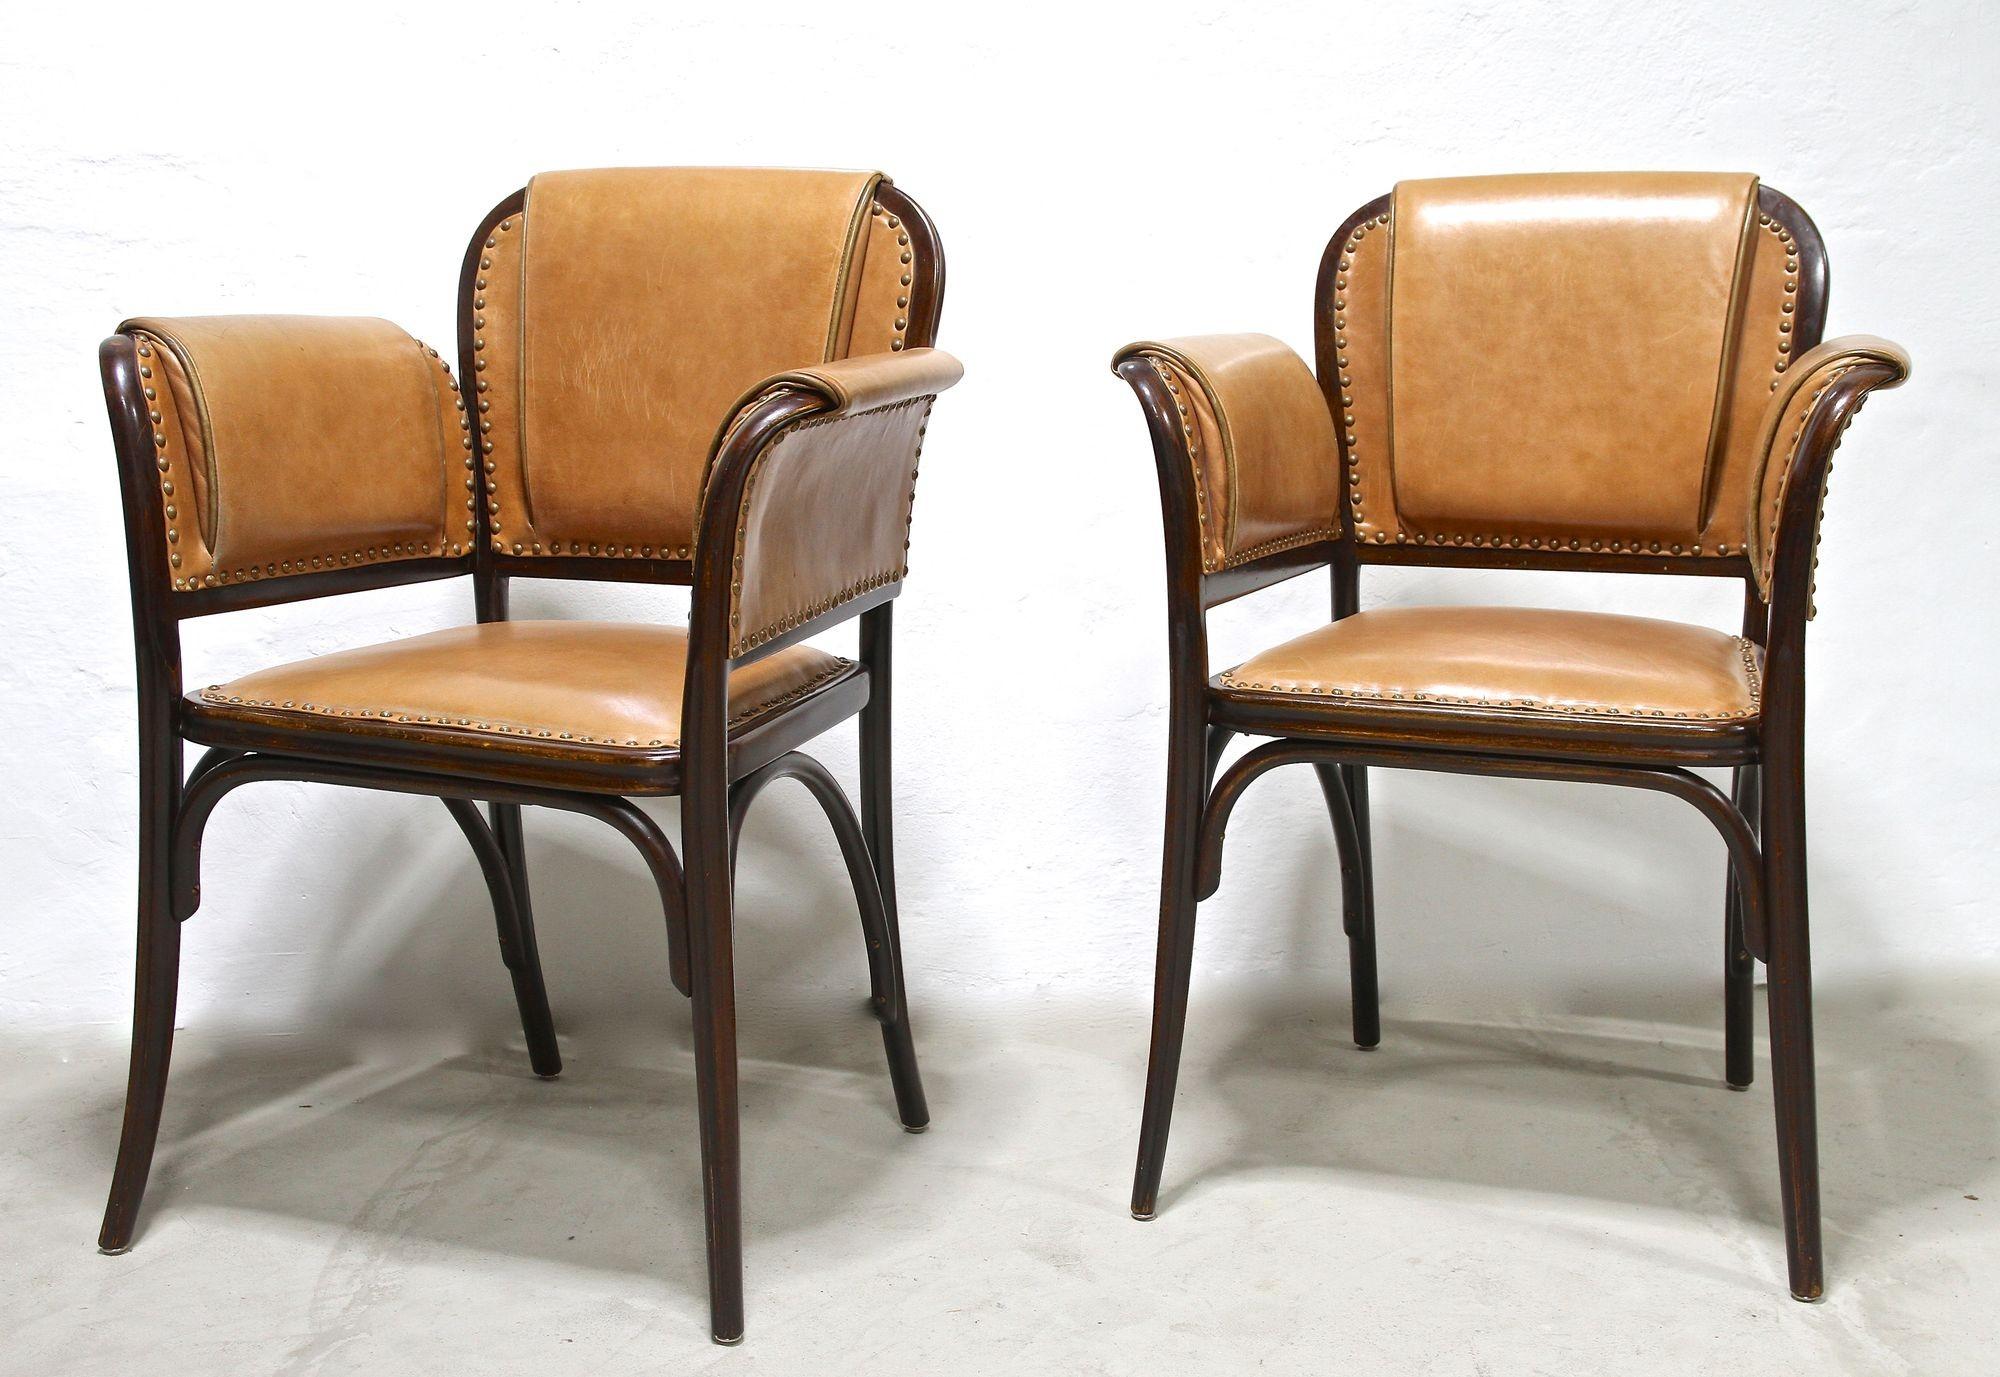 Pair of 20th Century Art Nouveau Bentwood Armchairs by Thonet, Austria, Ca. 1904 For Sale 10